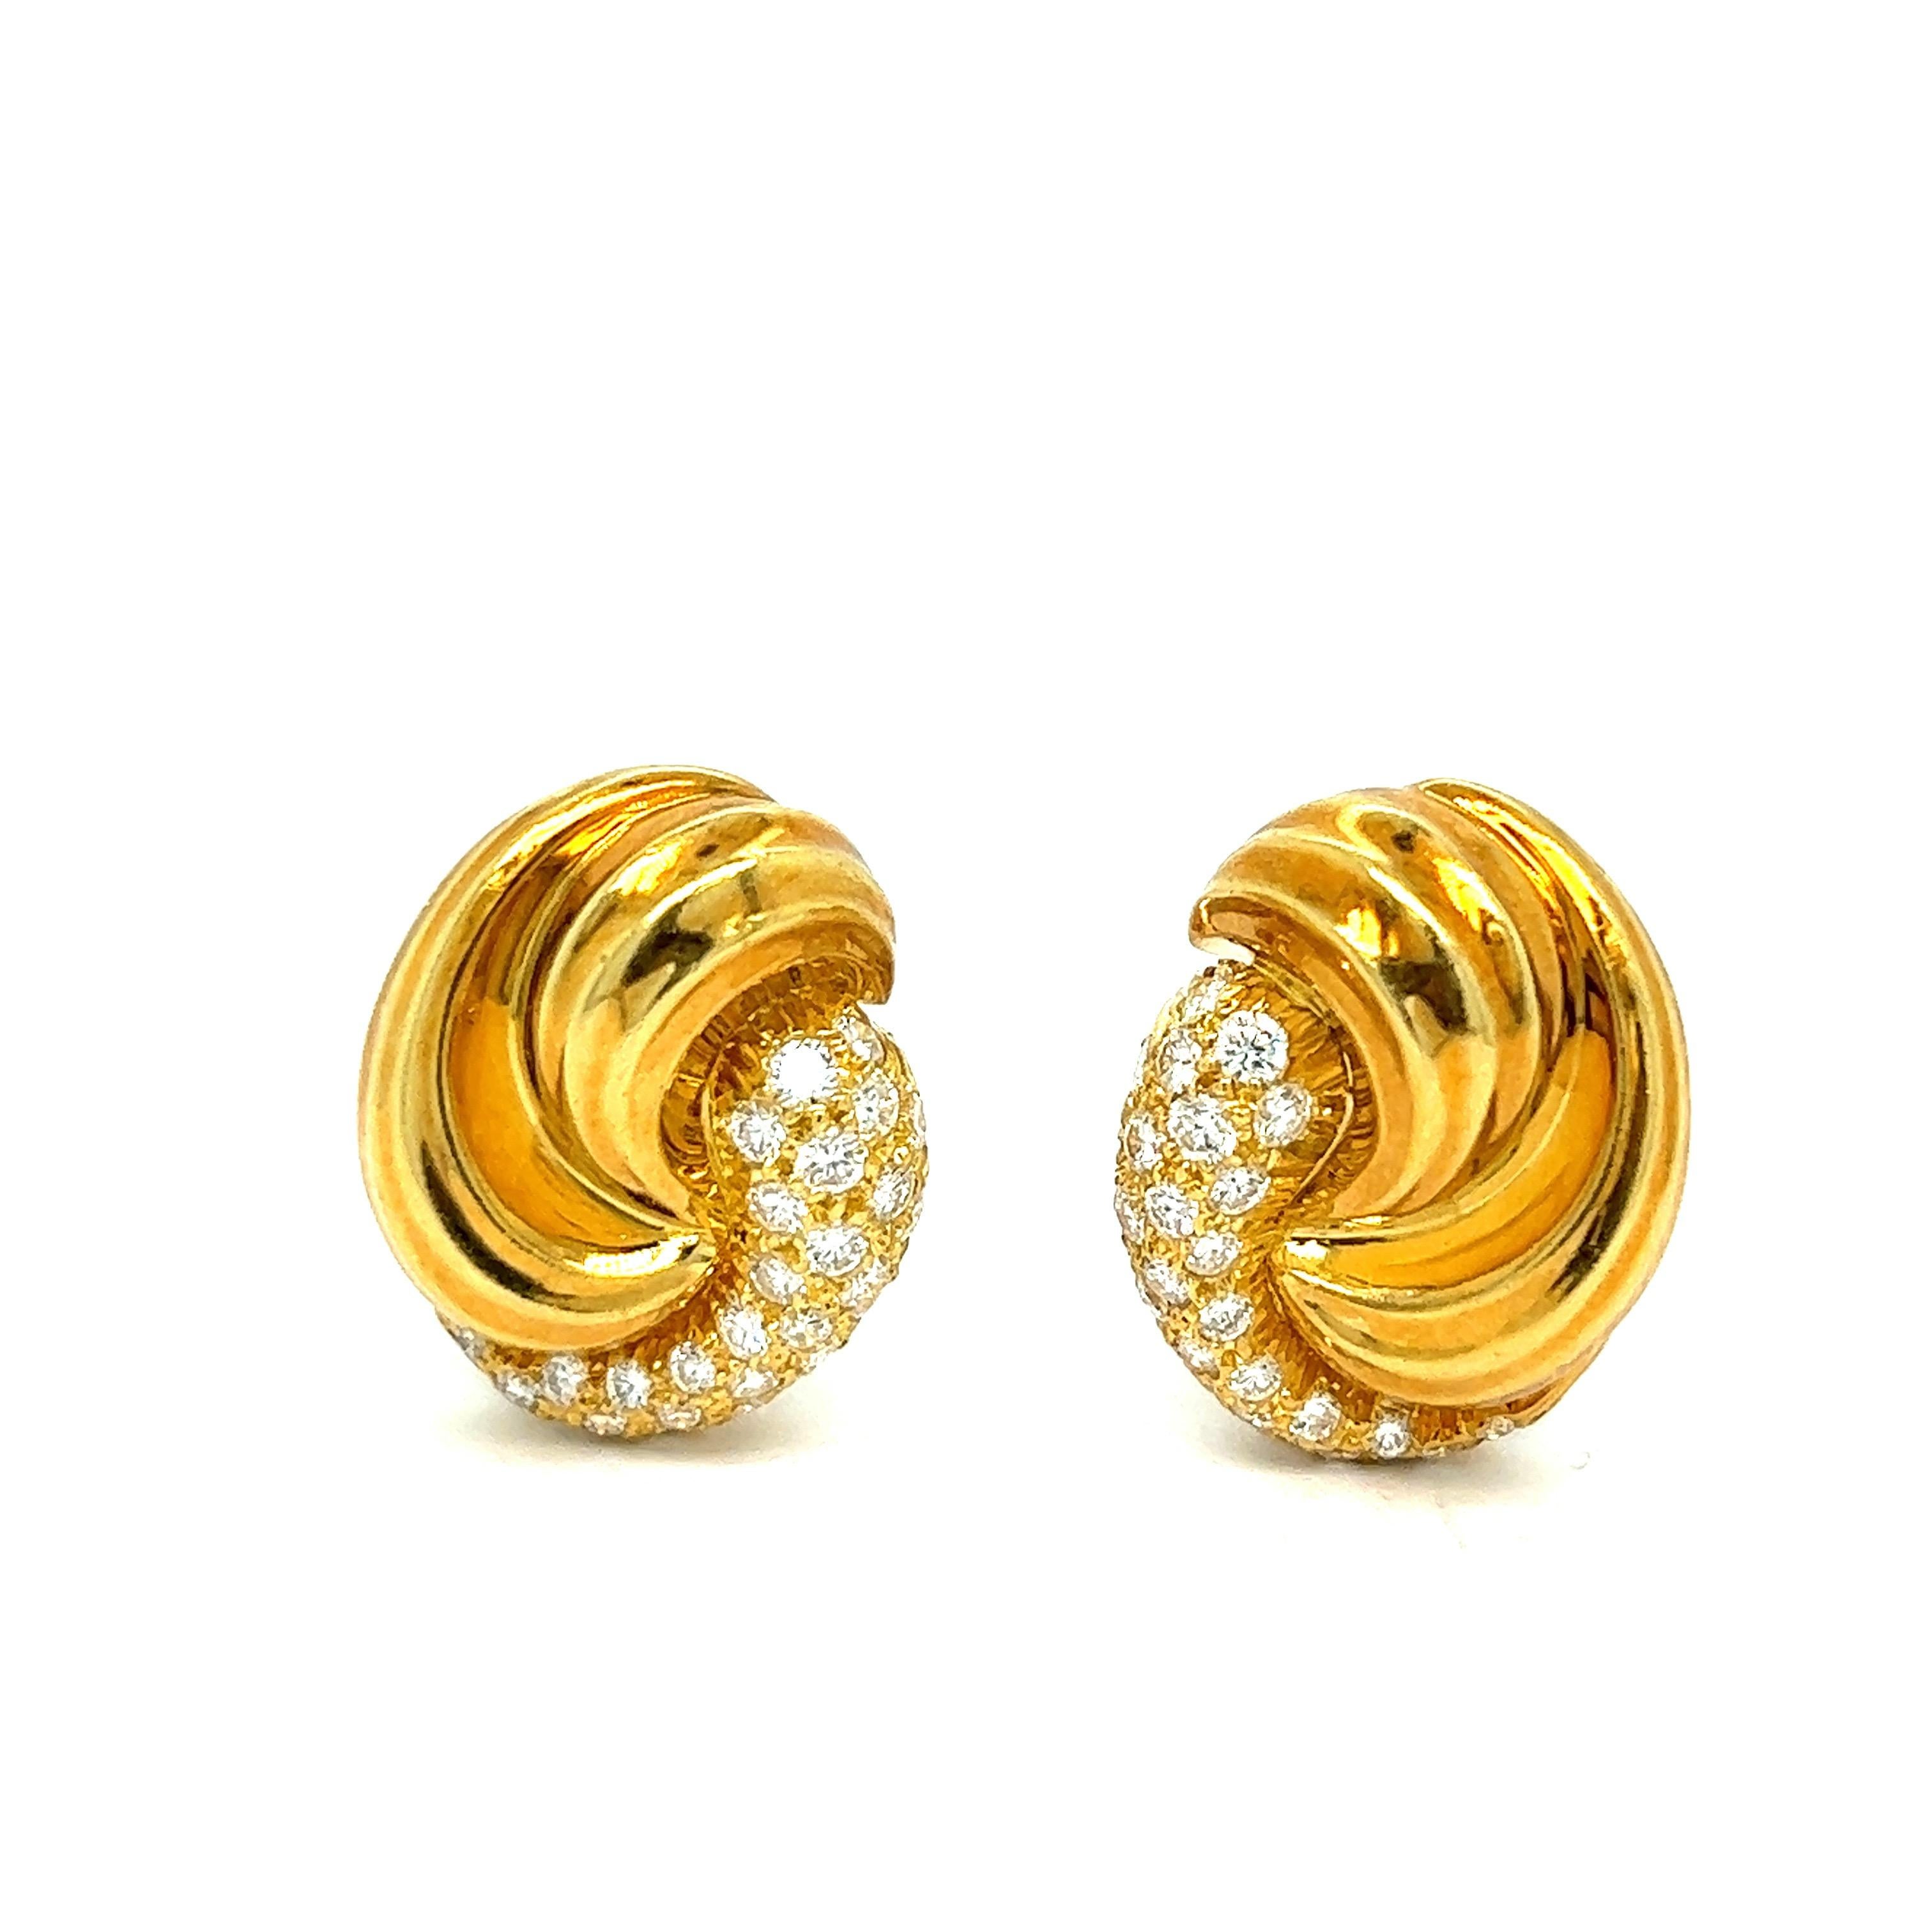 Pair of 18k yellow gold earrings , designed by Henry Dunay. Adorned with approx. 0.60ctw G/VS diamonds.  The earrings measure 18mm x 15mm. Hallmarked 18k Dunay. Weight of the pair - 12.6 grams. 